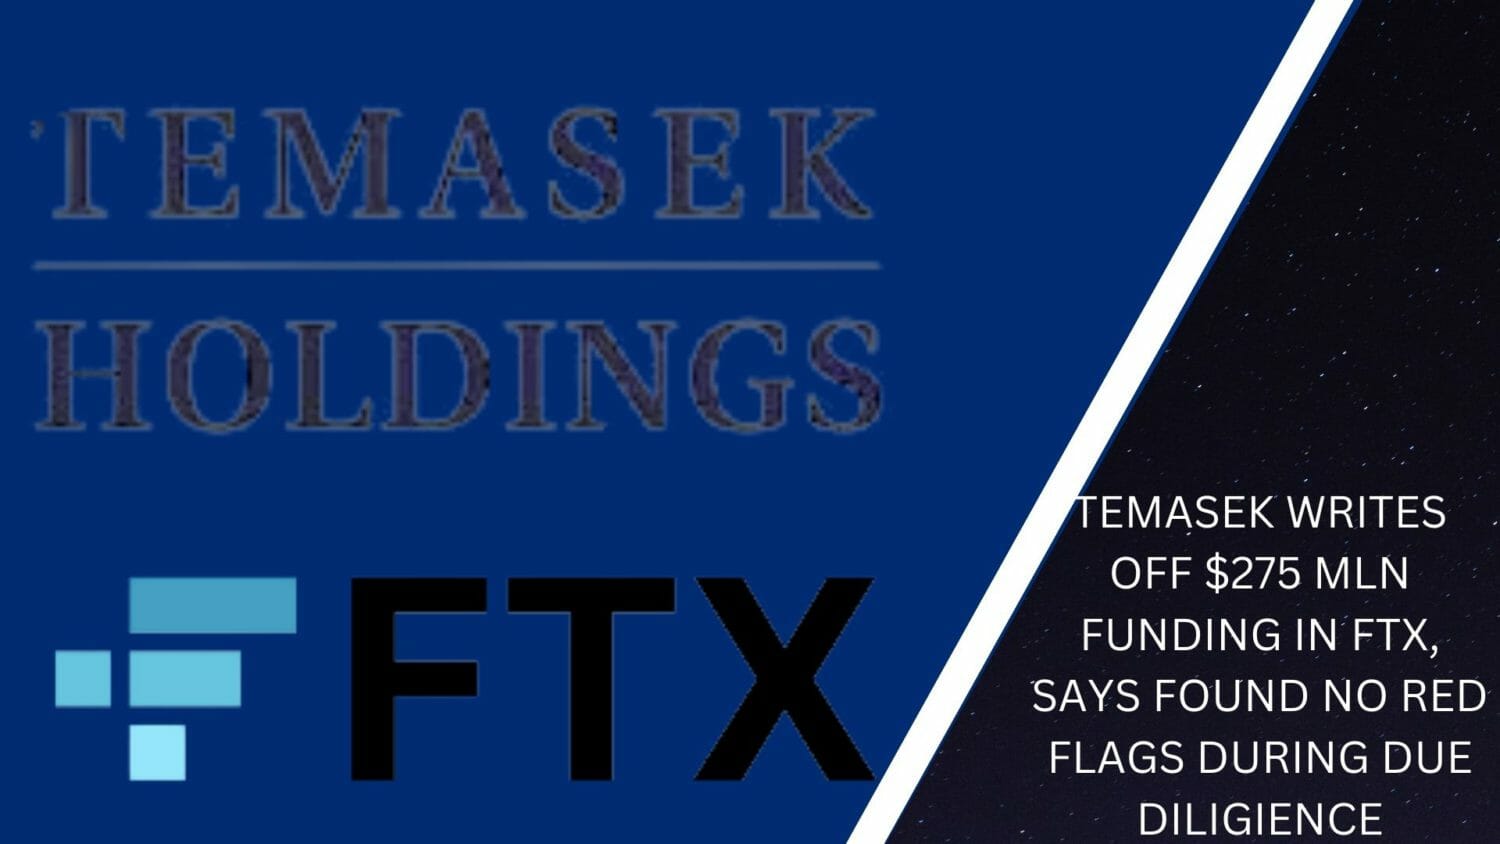 Temasek Writes Off $275 Mln Funding In Ftx, Says Found No Red Flags During Due Diligence